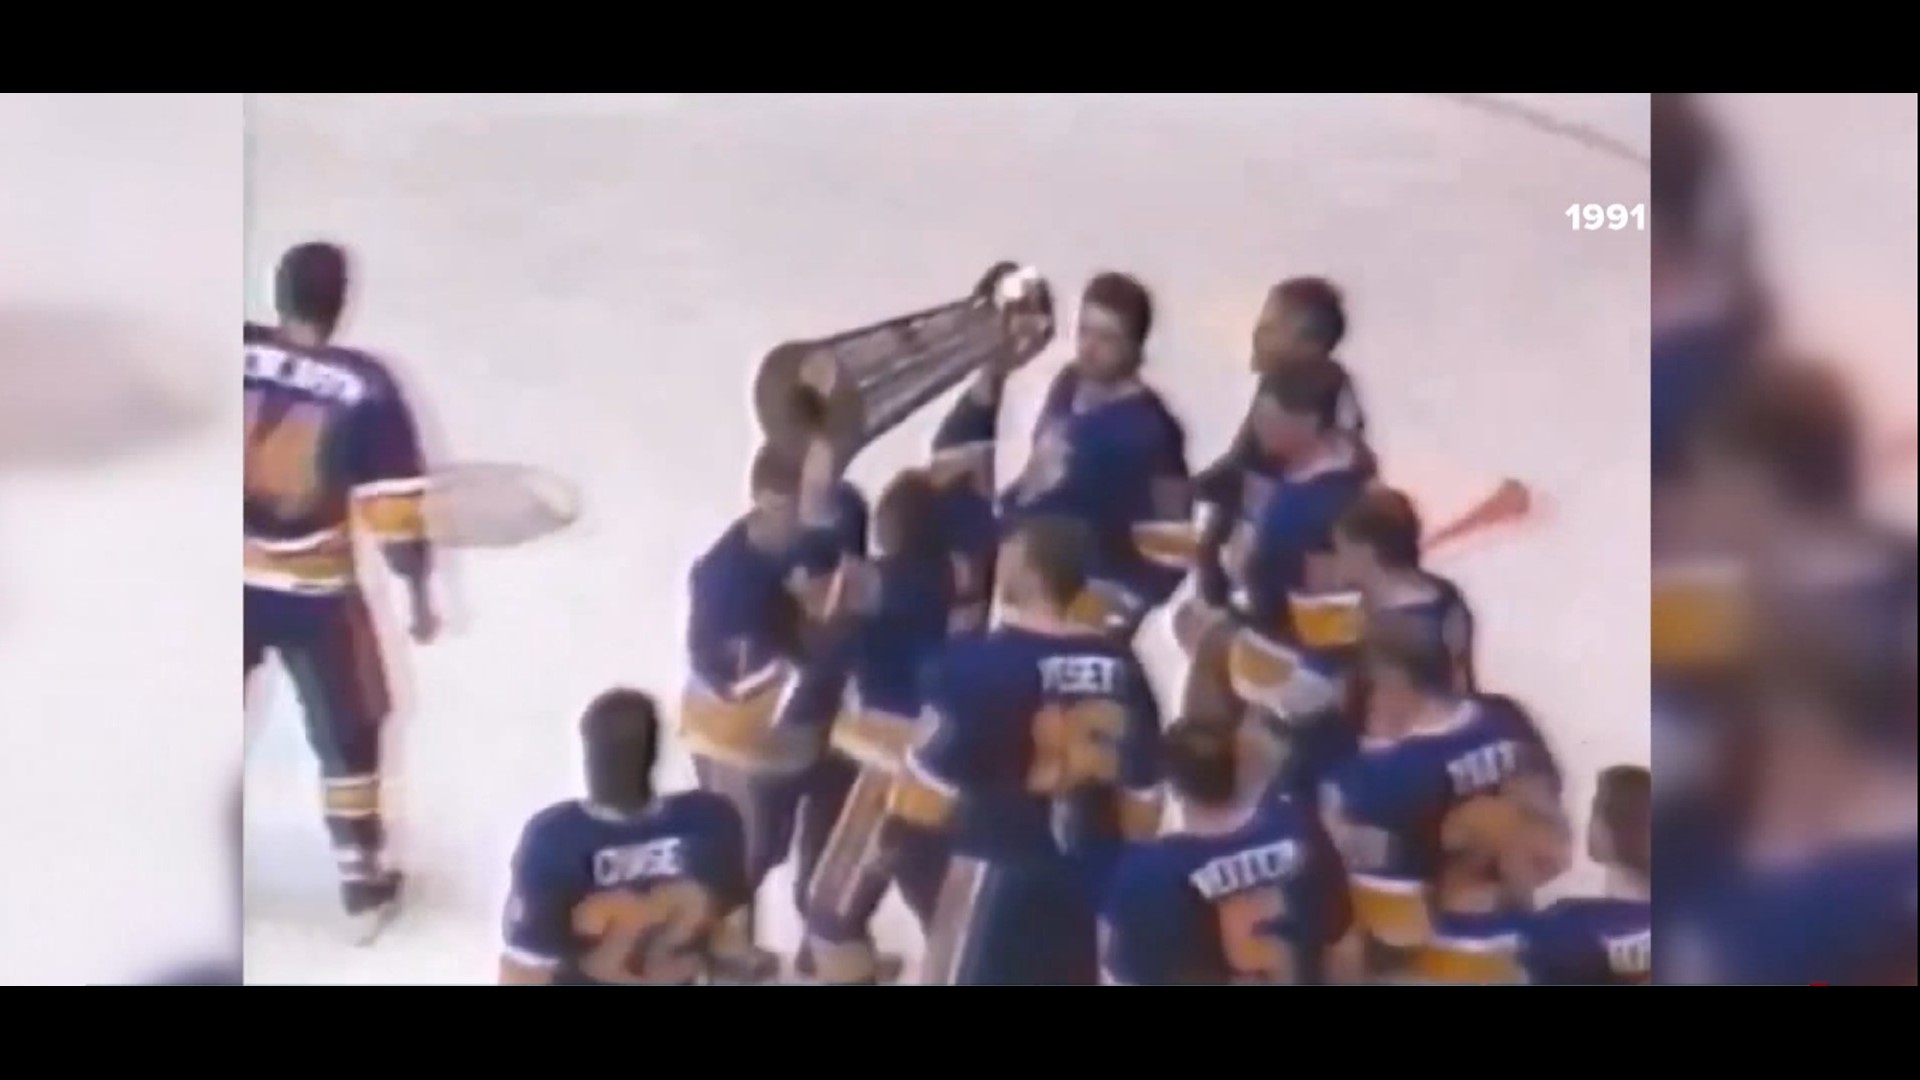 5 On Your Side Frank Cusumano chatted with St. Louis Blues legends Tony Twist and Kelly Chase